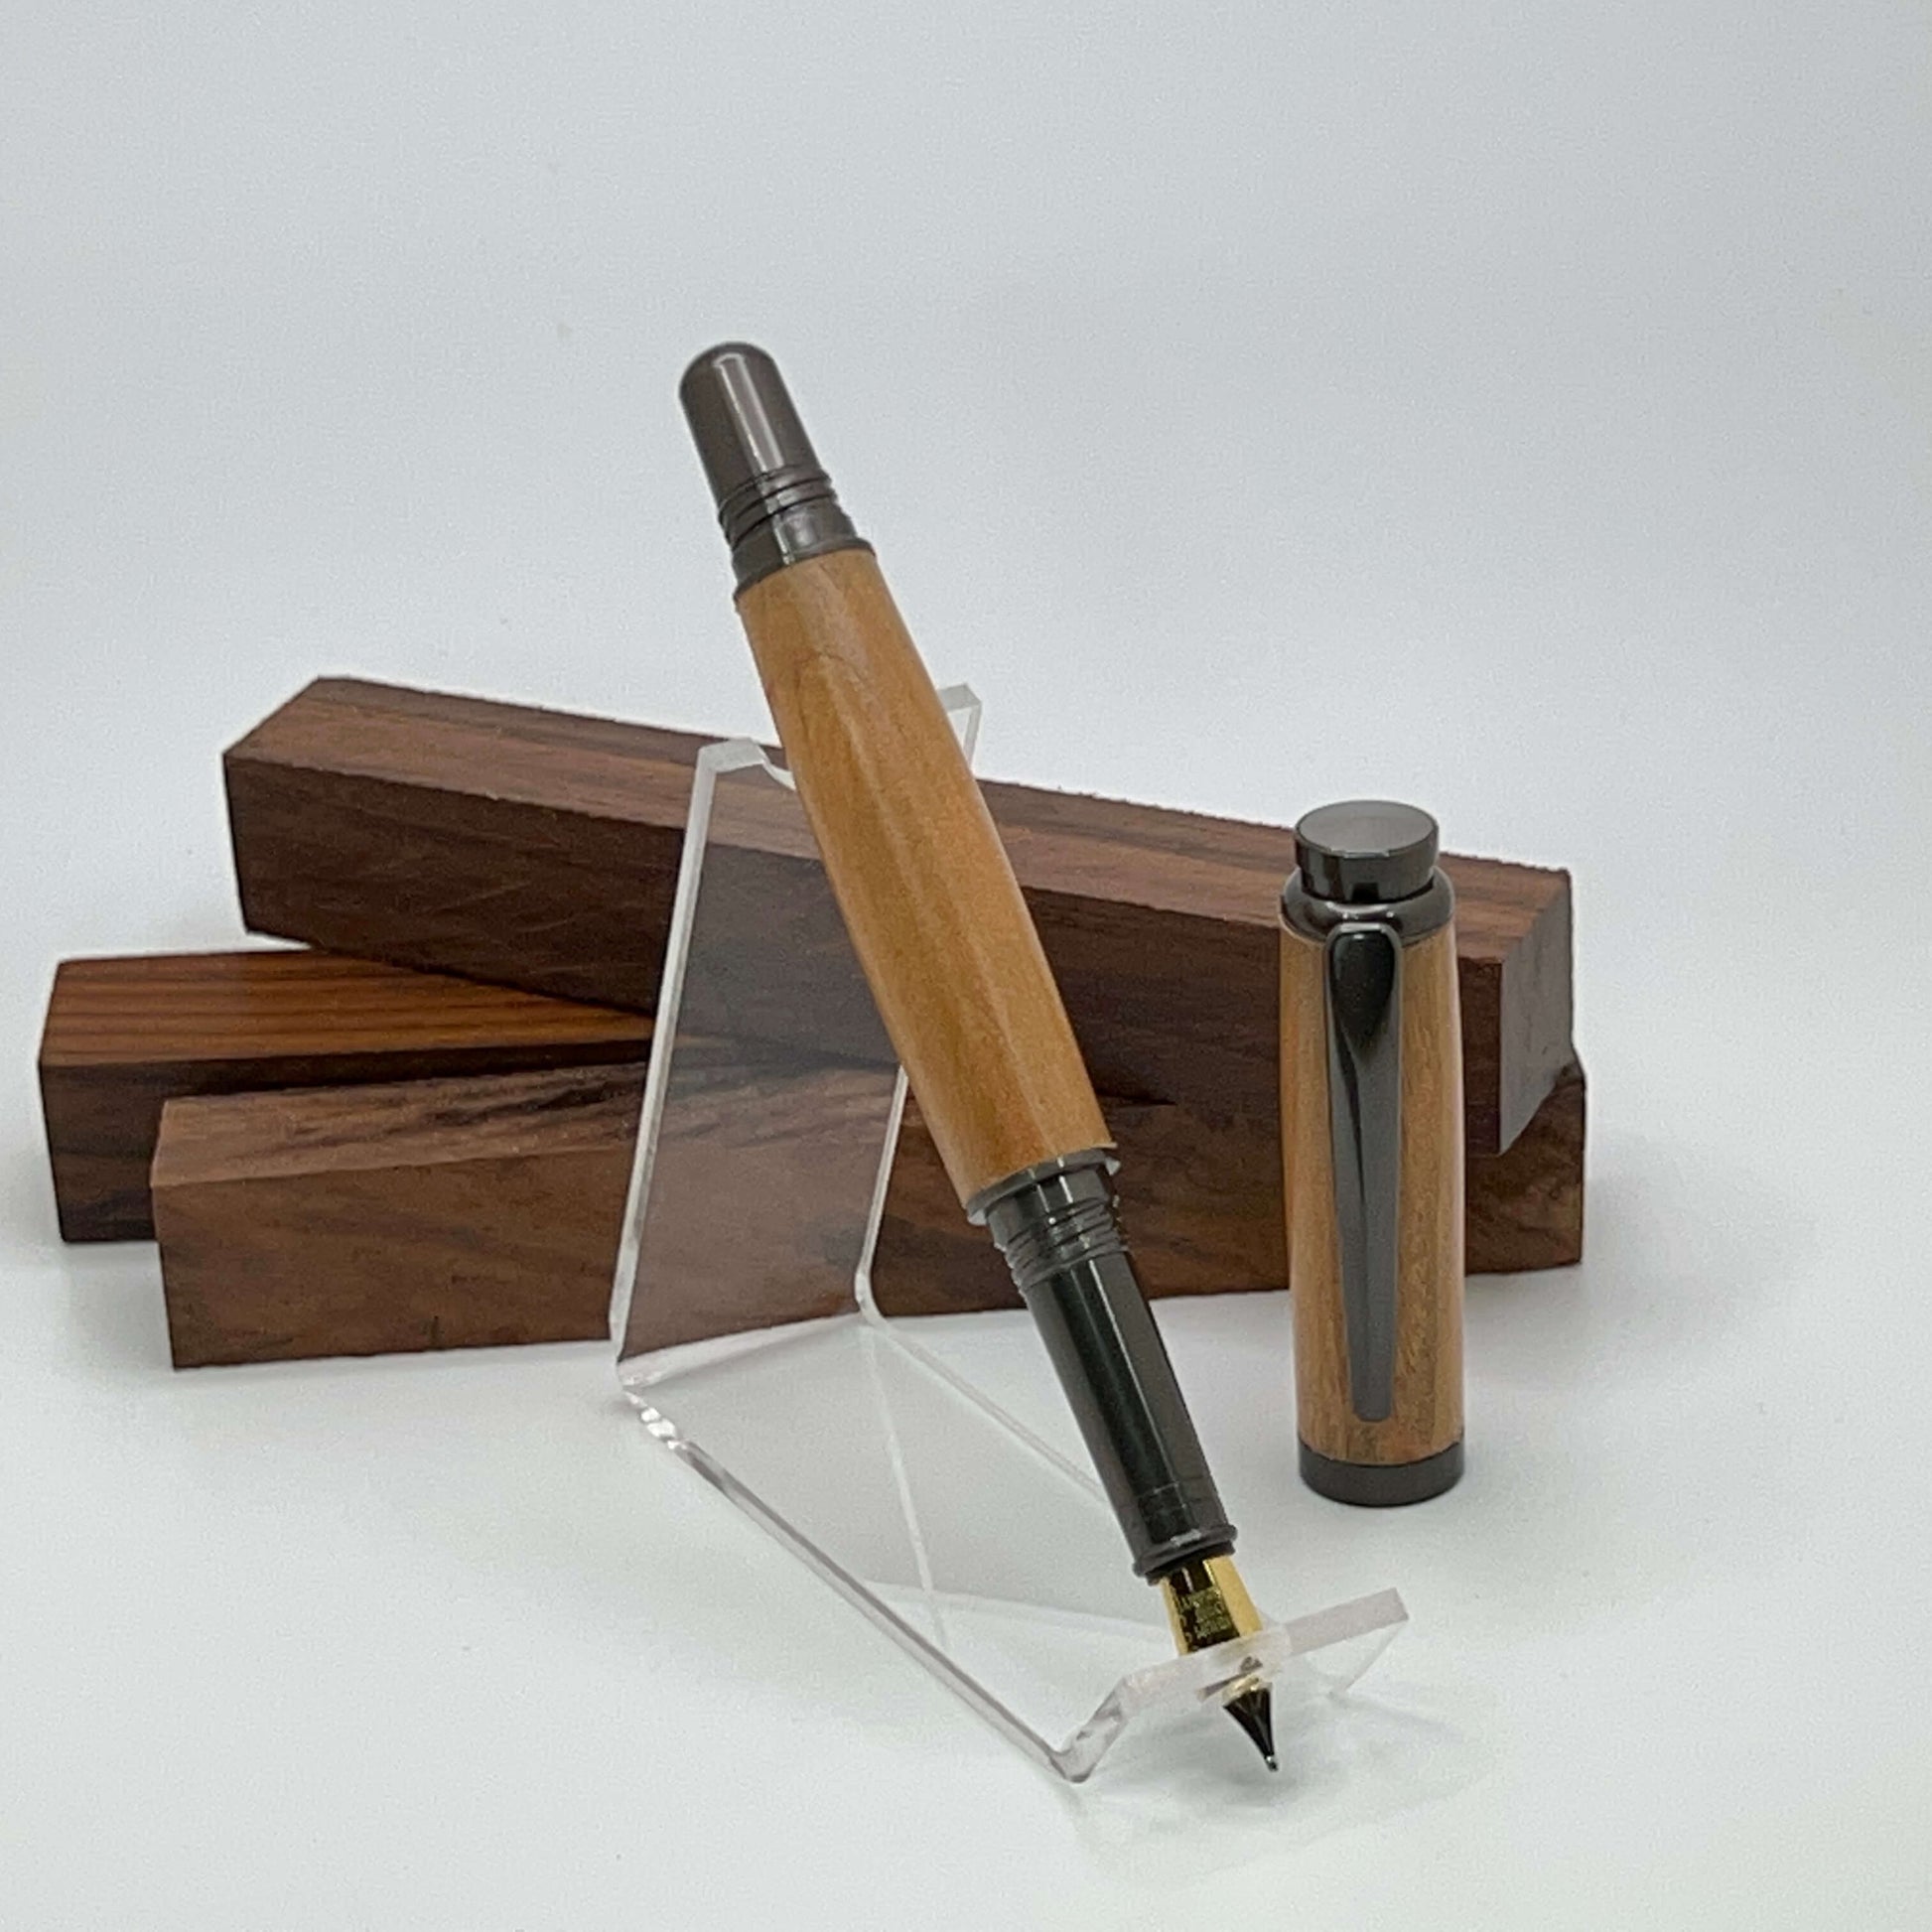 Handcrafted pen with cherry wood and satin gunmetal hardware fountain pen